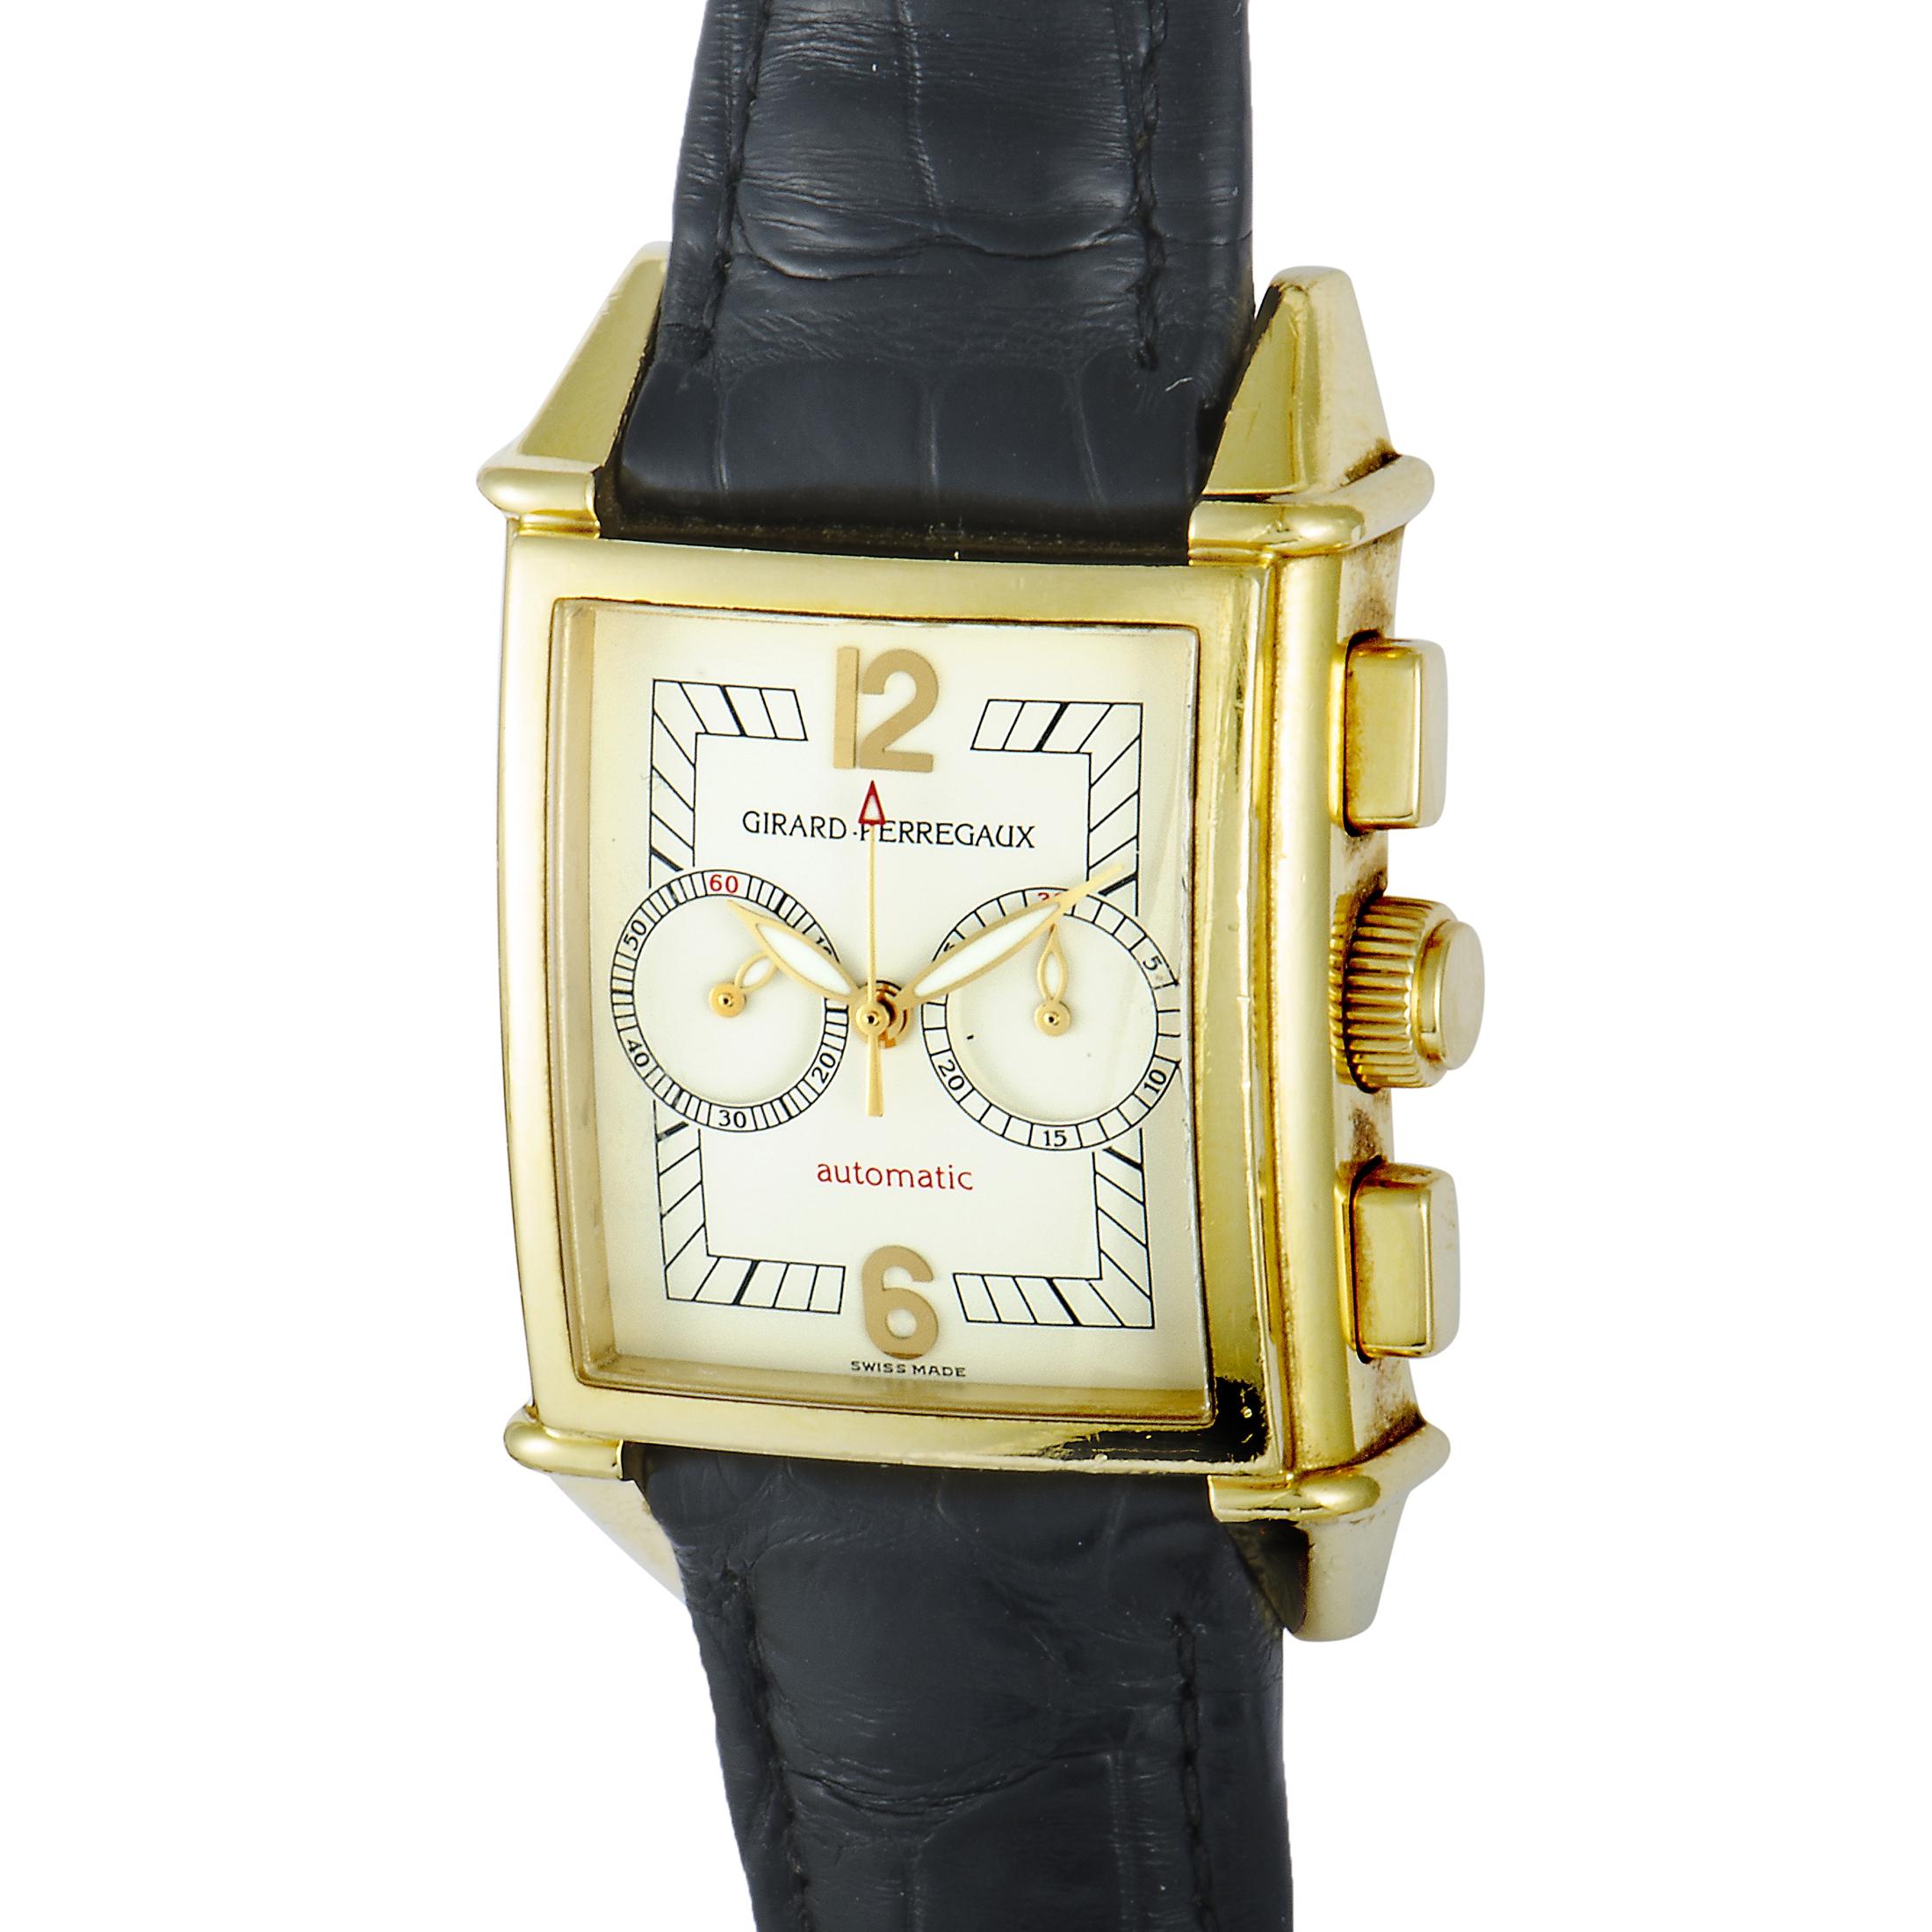 This magnificent timepiece from Girard-Perregaux, circa 2000's, features a chronograph with a beautiful silvered guilloche dial, yellow gold markers, and Arabic numerals. The case of the watch is made of 18K yellow gold and it is presented on a